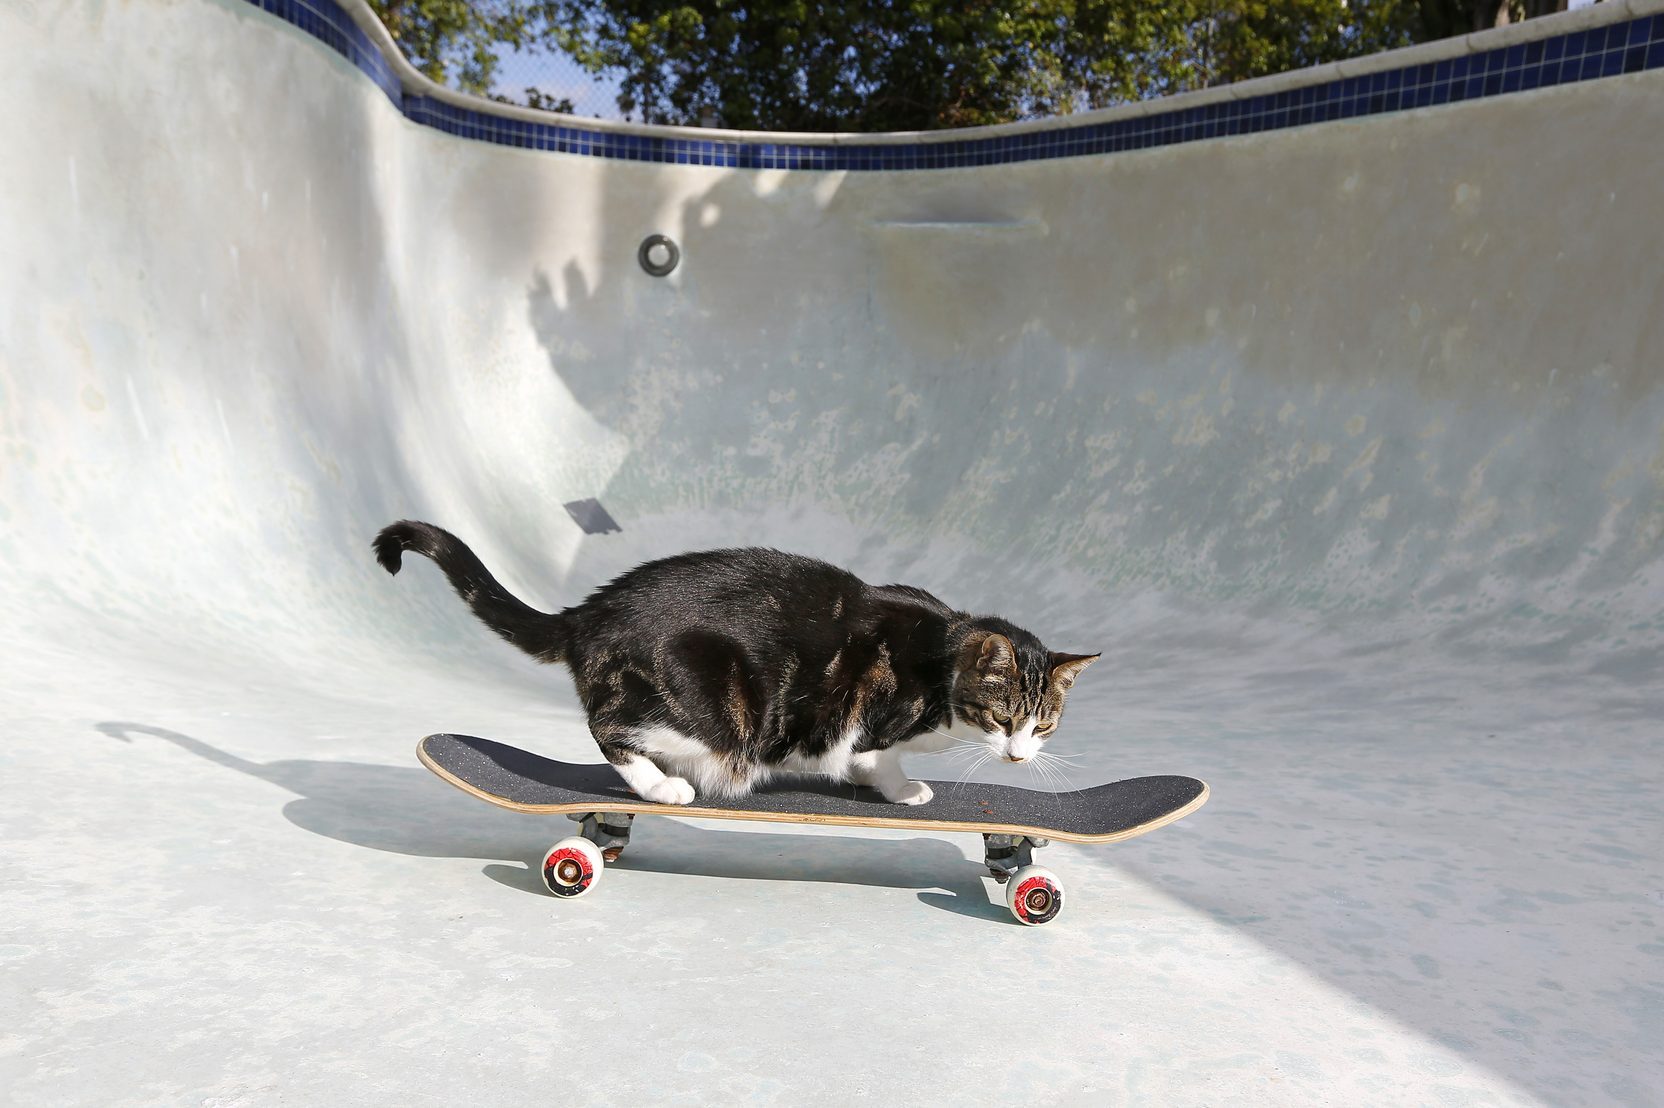 A cat rides a skateboard in an empty pool in San Diego, California.